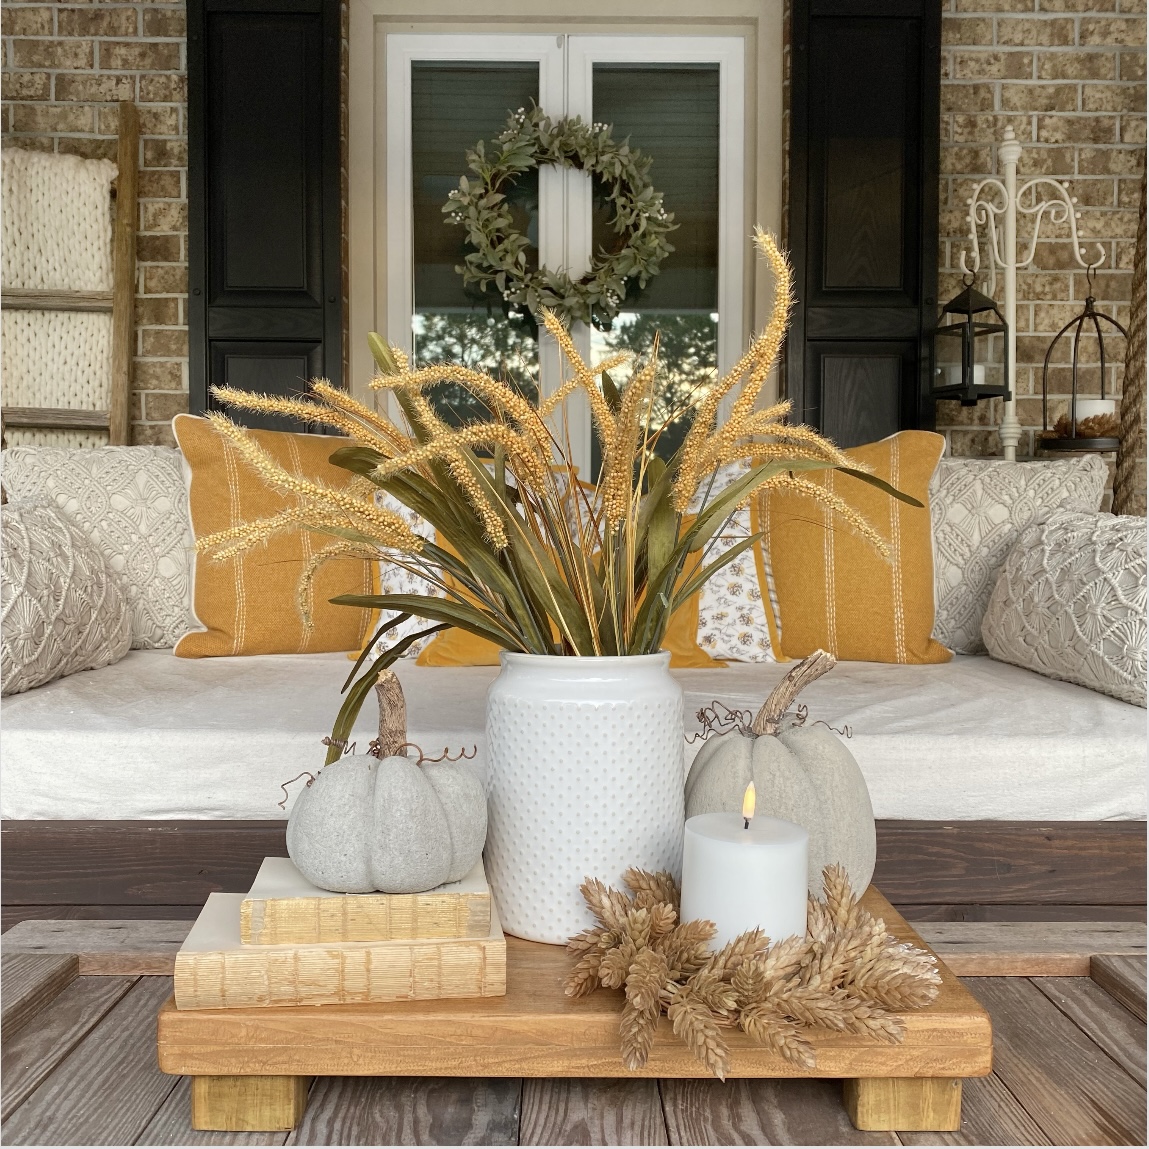 Fall vignette on the a coffee table on the front porch. The vignette includes Fall florals in a white crock, concrete pumpkins, a candle and vintage books stacked on a riser.